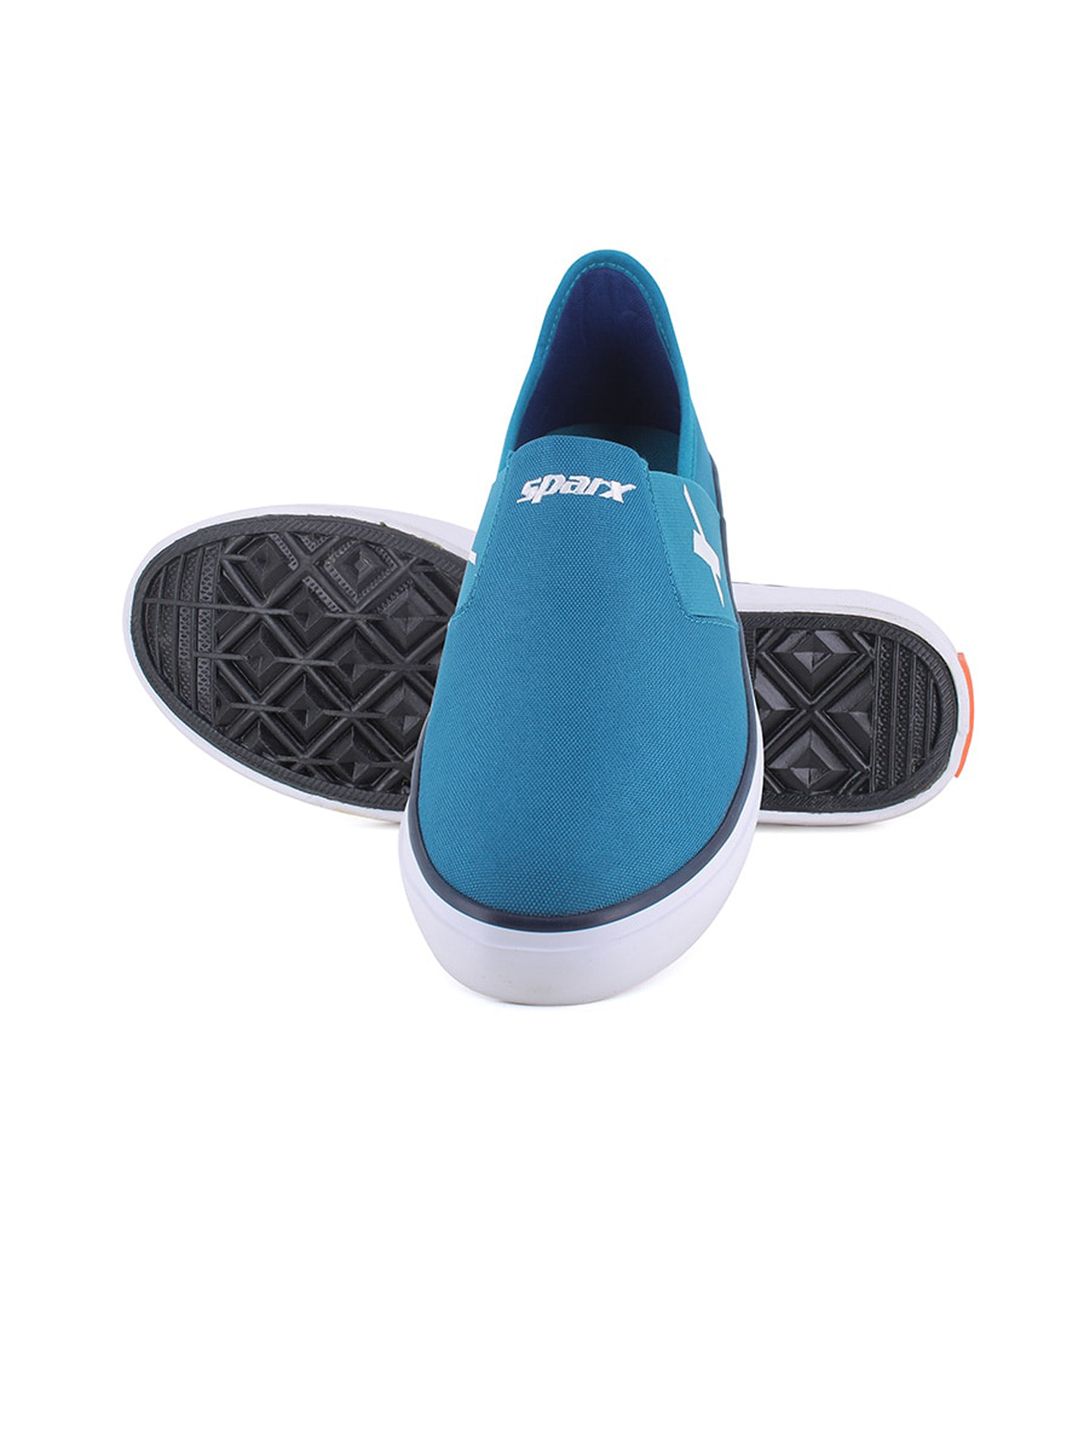 Sparx Men Canvas Comfort Insole Slip-On Sneakers